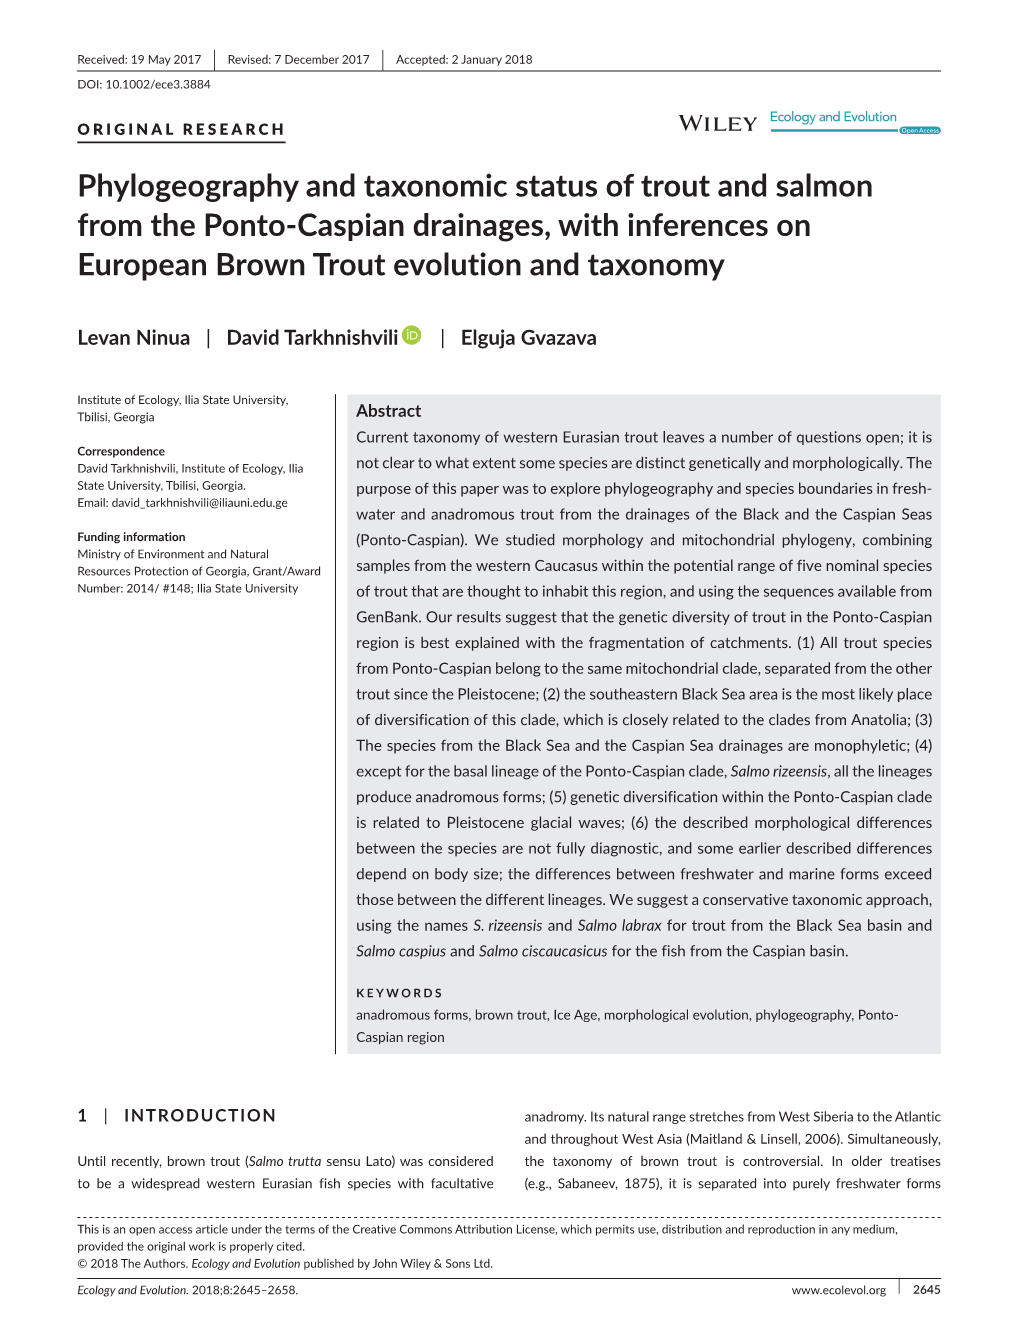 Phylogeography and Taxonomic Status of Trout and Salmon from the Ponto-­Caspian Drainages, with Inferences on European Brown Trout Evolution and Taxonomy